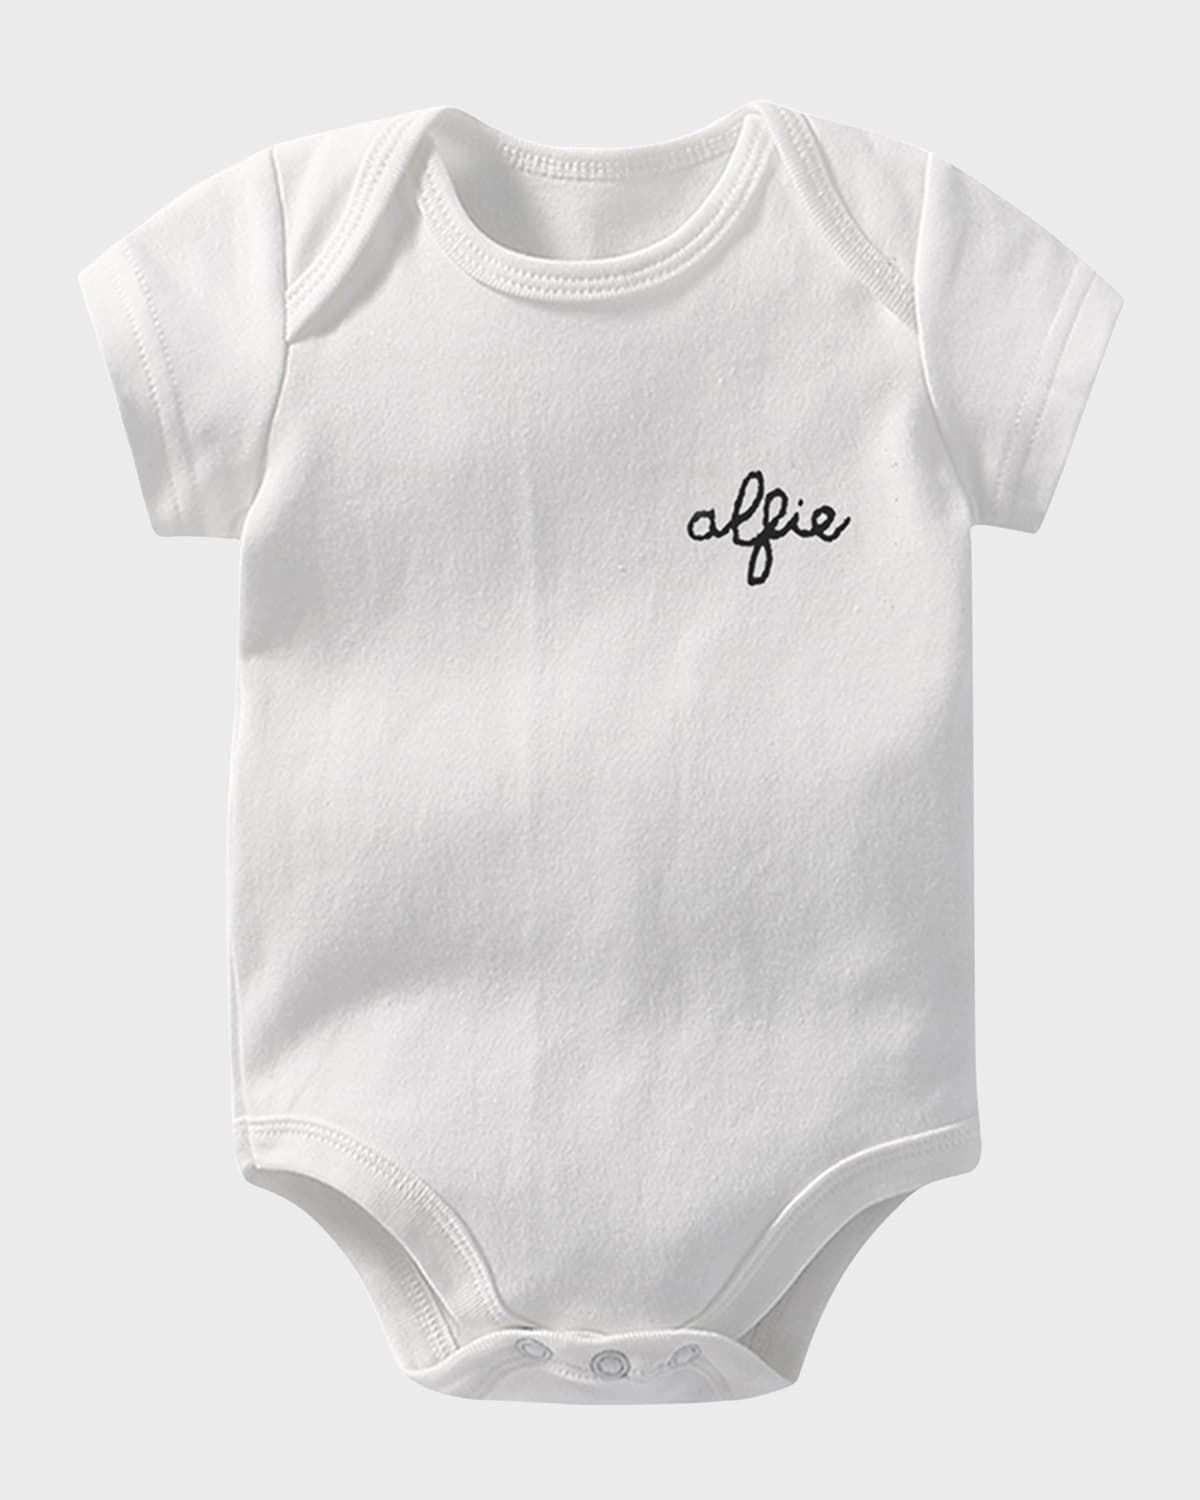 Sweet Olive Street Kid's My Name Is! Personalized Bodysuit, Sizes Newborn-18m In White